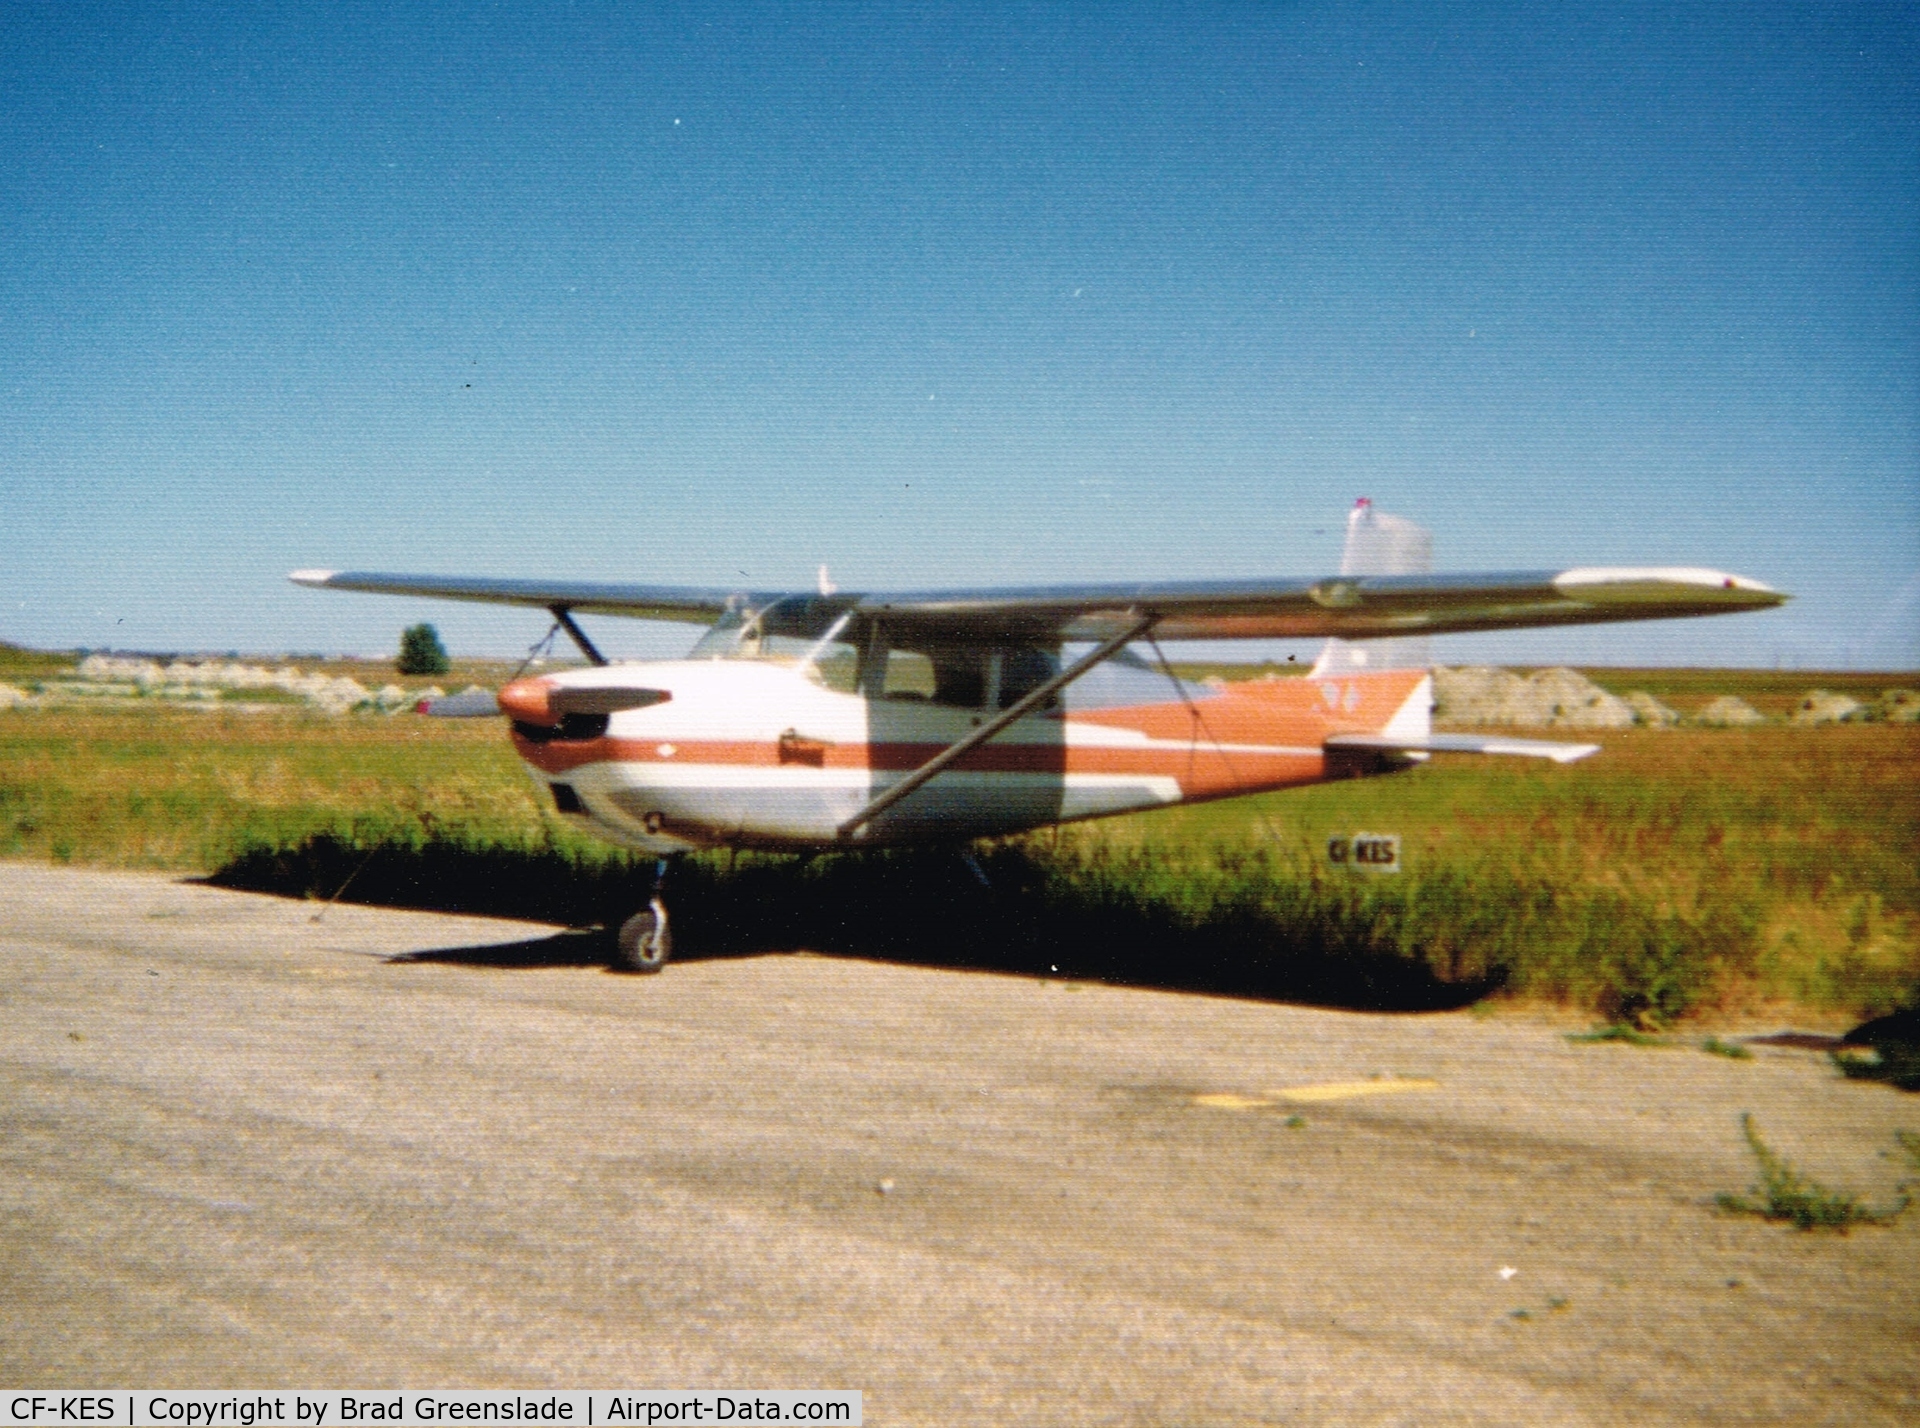 CF-KES, 1958 Cessna 175X Skylark C/N 55136X, CF-KES Parked at an airfield back on the 1970's. My dad was the owner of this plane from the late 60's to mid 70's